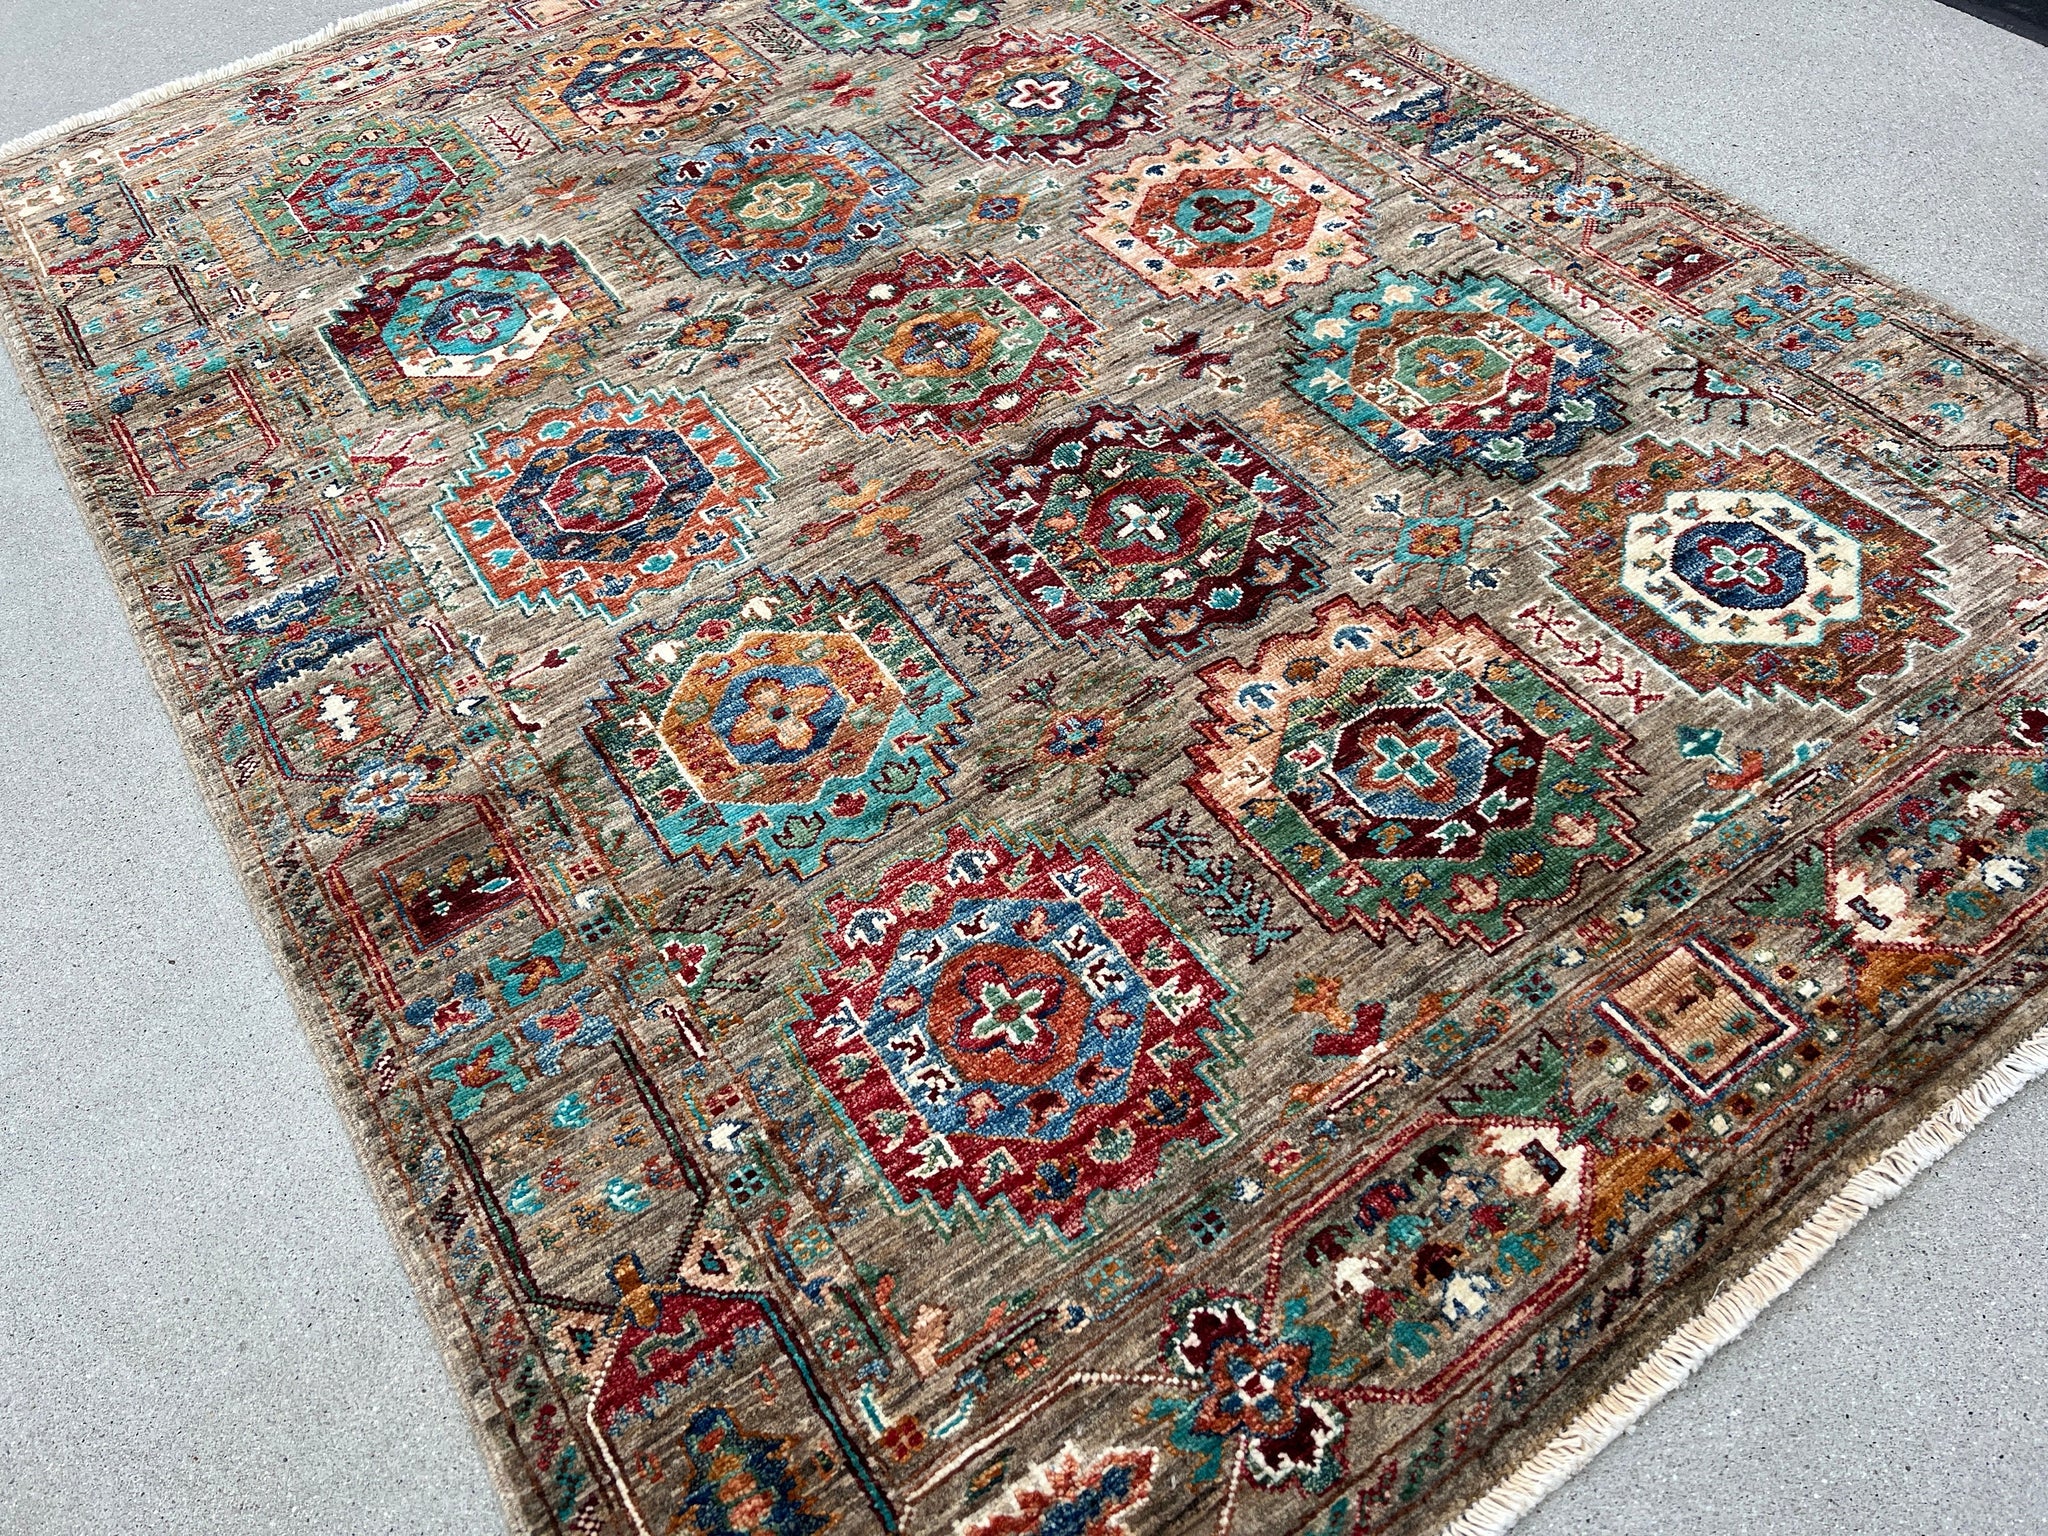 4x6 Handmade Afghan Rug | Grey Brown Teal Turquoise Blue Green Red Caramel Gold Ivory Cream | Wool Boho Persian Turkish Oushak Hand Knotted